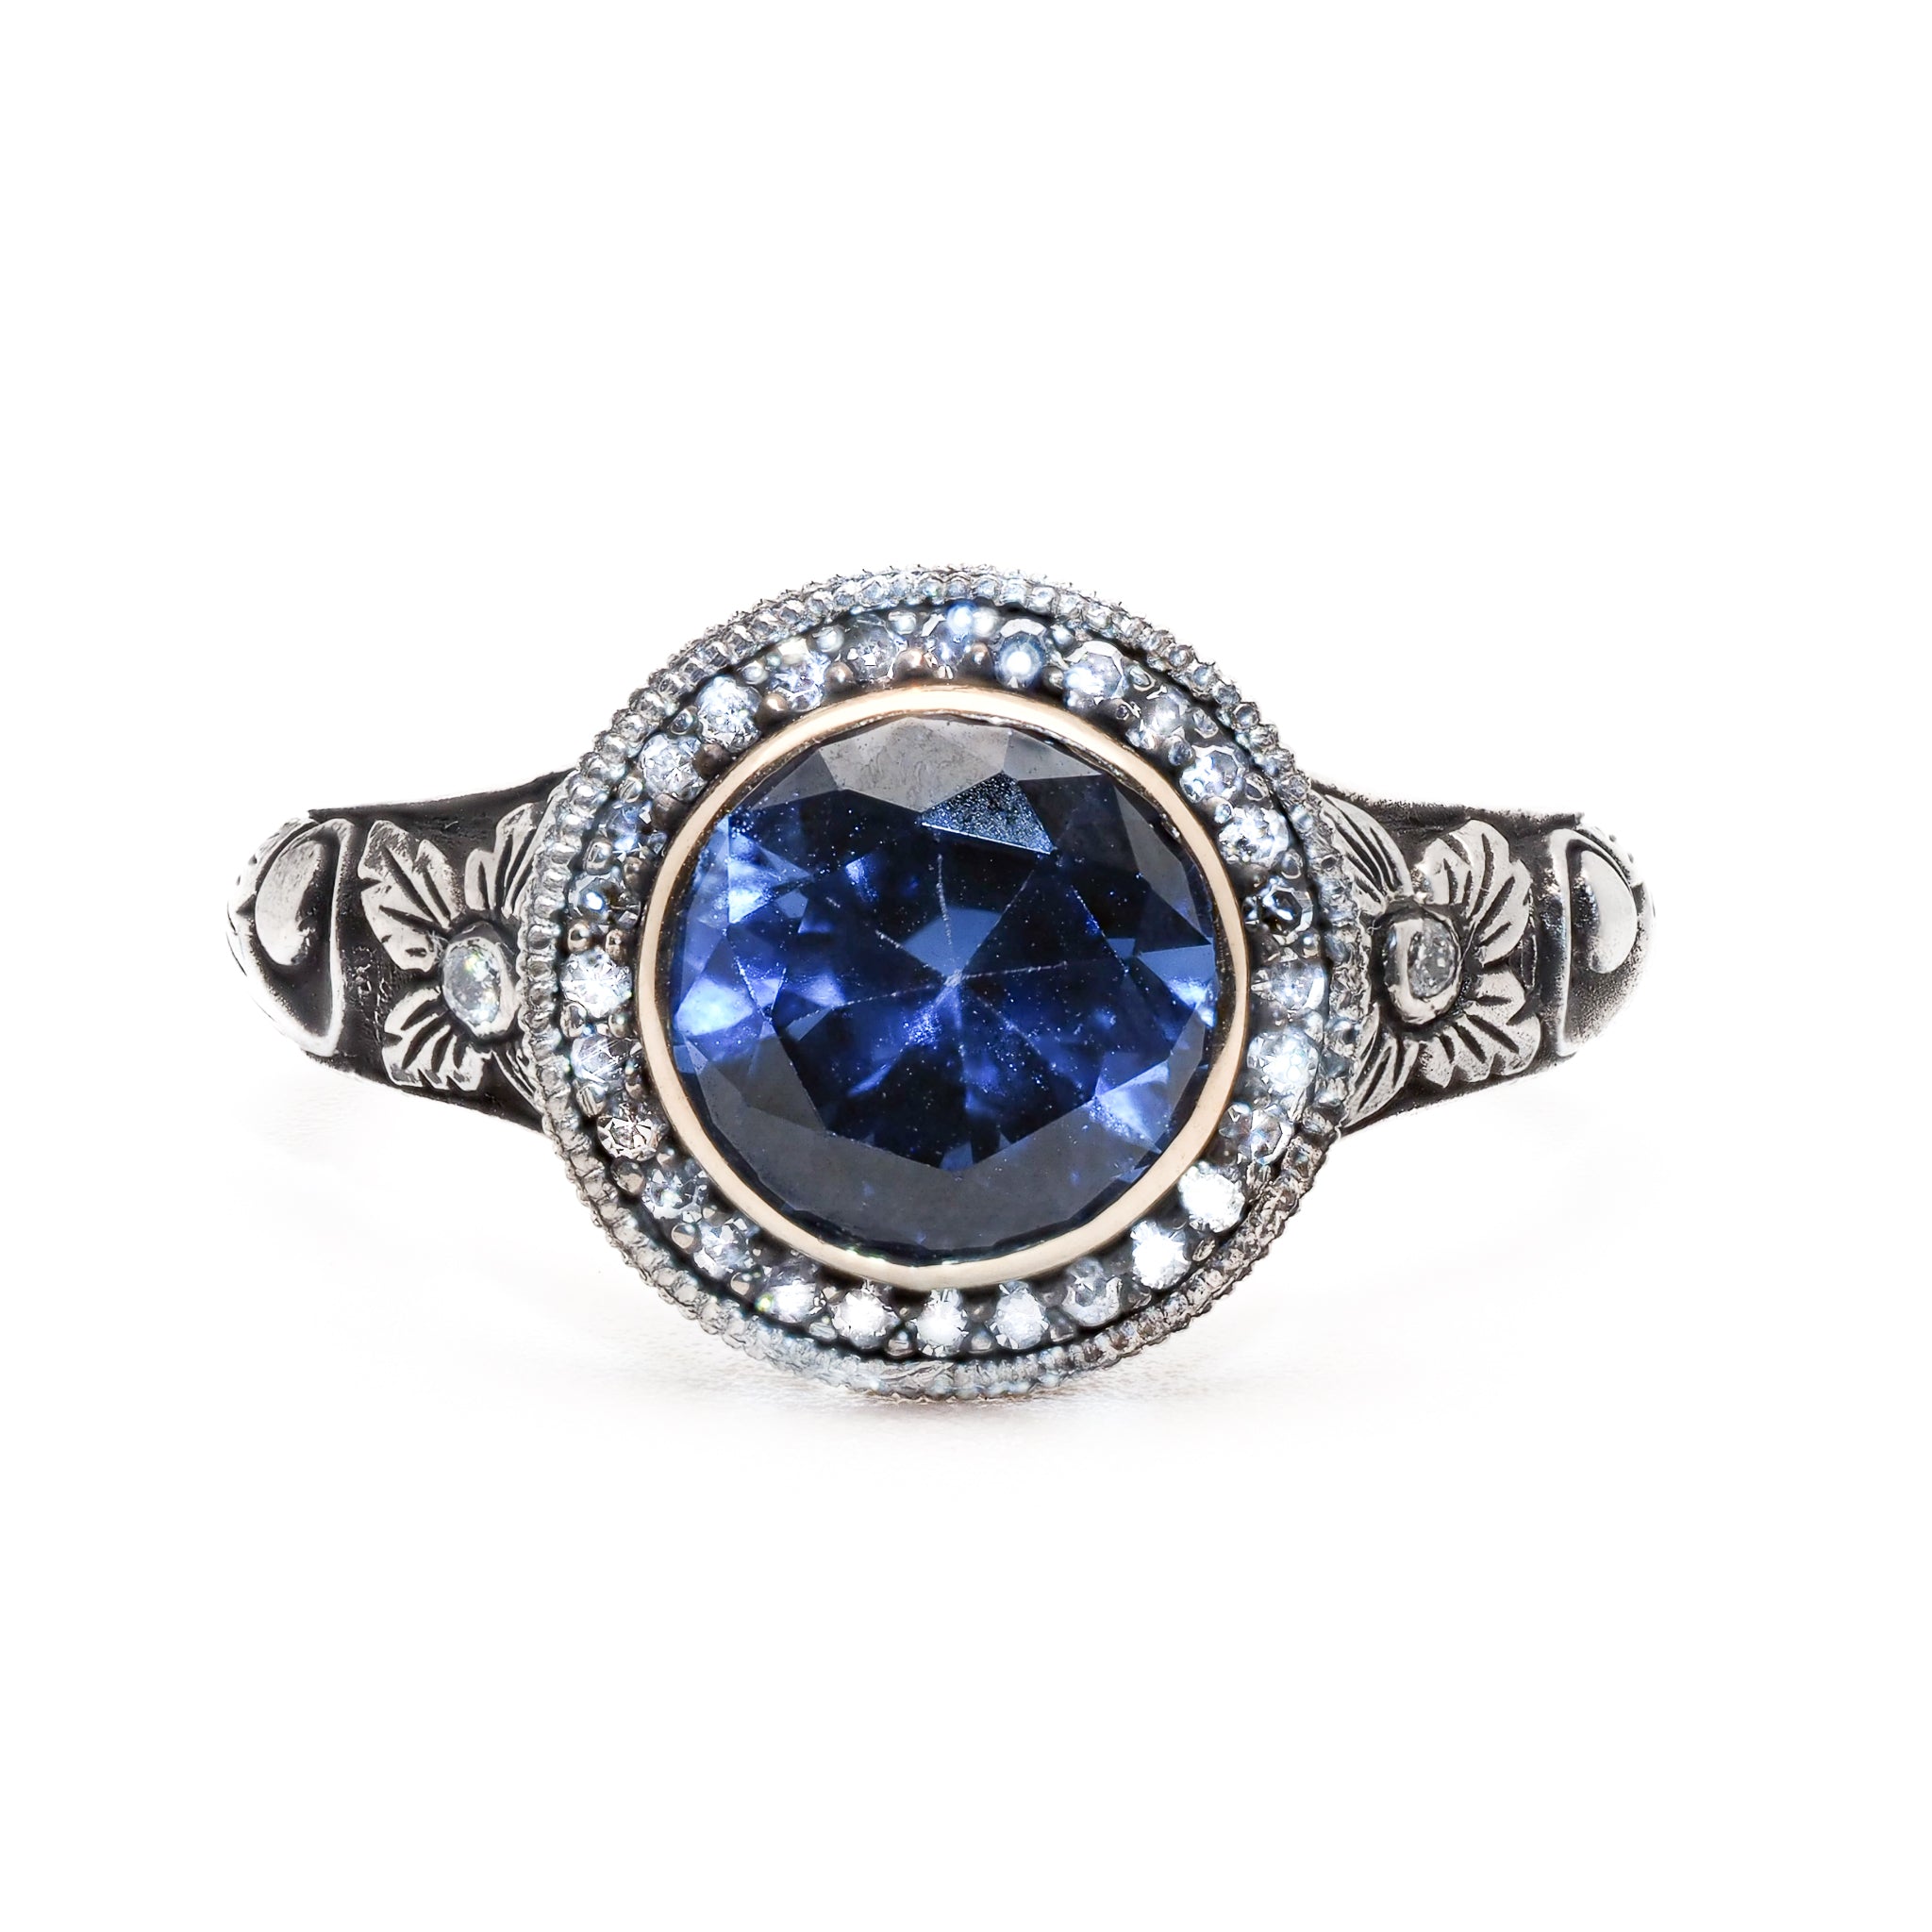 Sapphire Engagement Ring - Handcrafted with 14k Yellow Gold and 2ct Natural Sapphire.